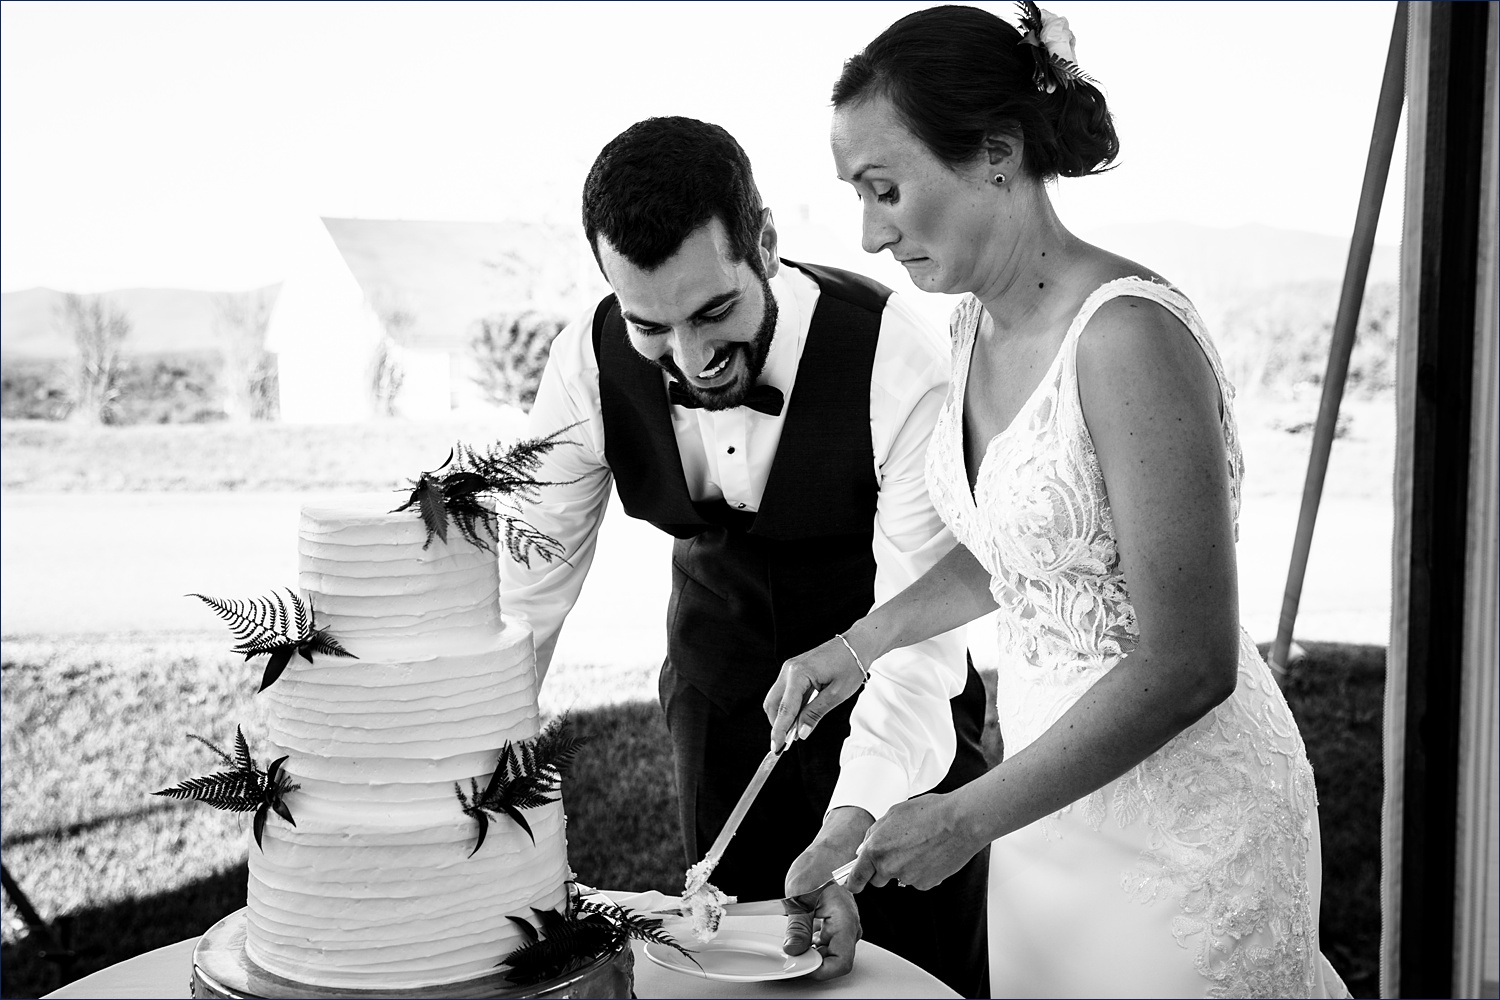 More laughter and faces during the cake cutting at the White Mountains NH wedding day